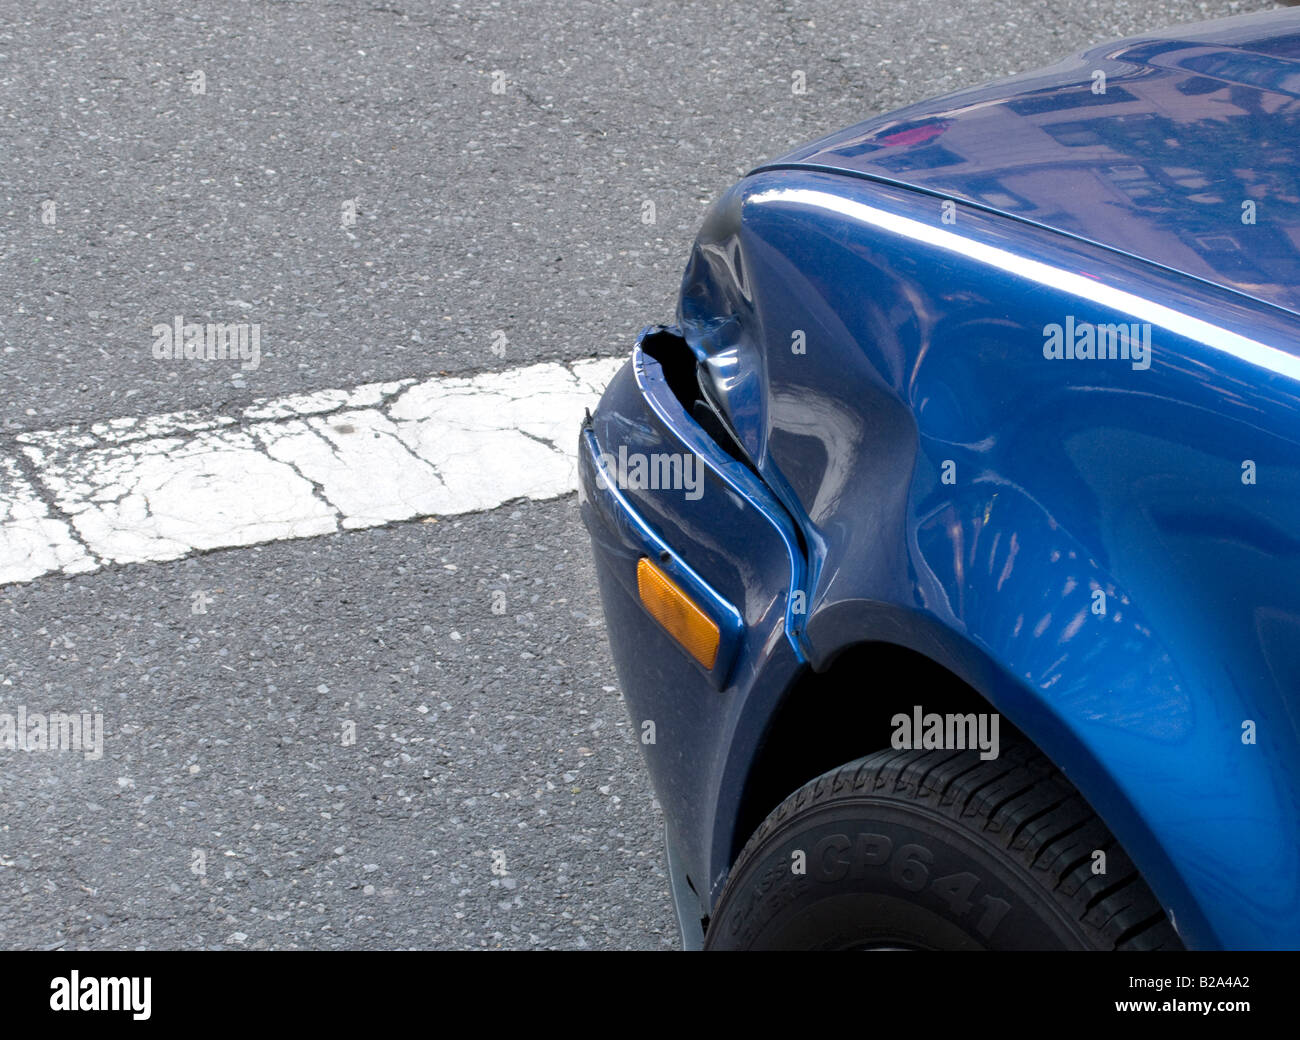 automobile with dented fender Stock Photo